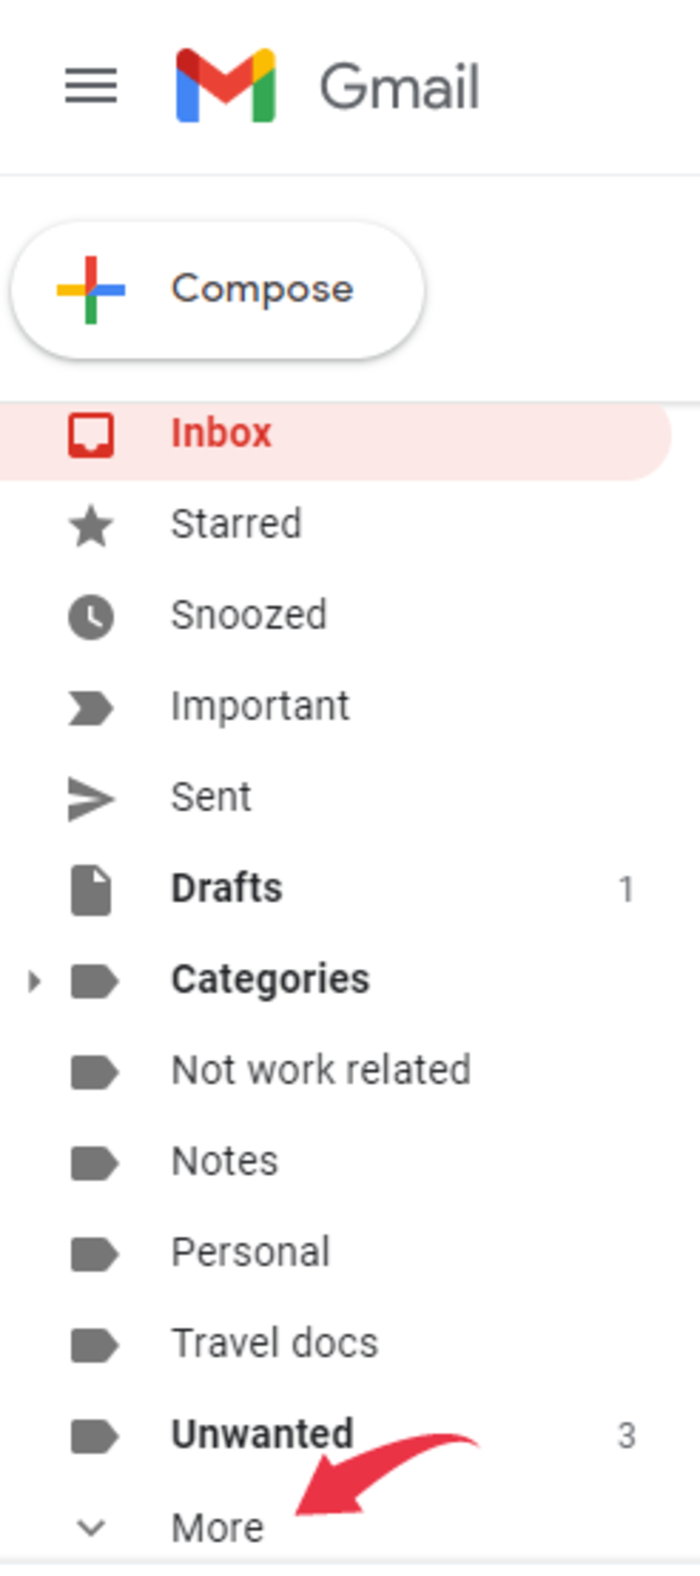 How to Use Gmail Labels (Step-by-Step Guide w/Screenshots)